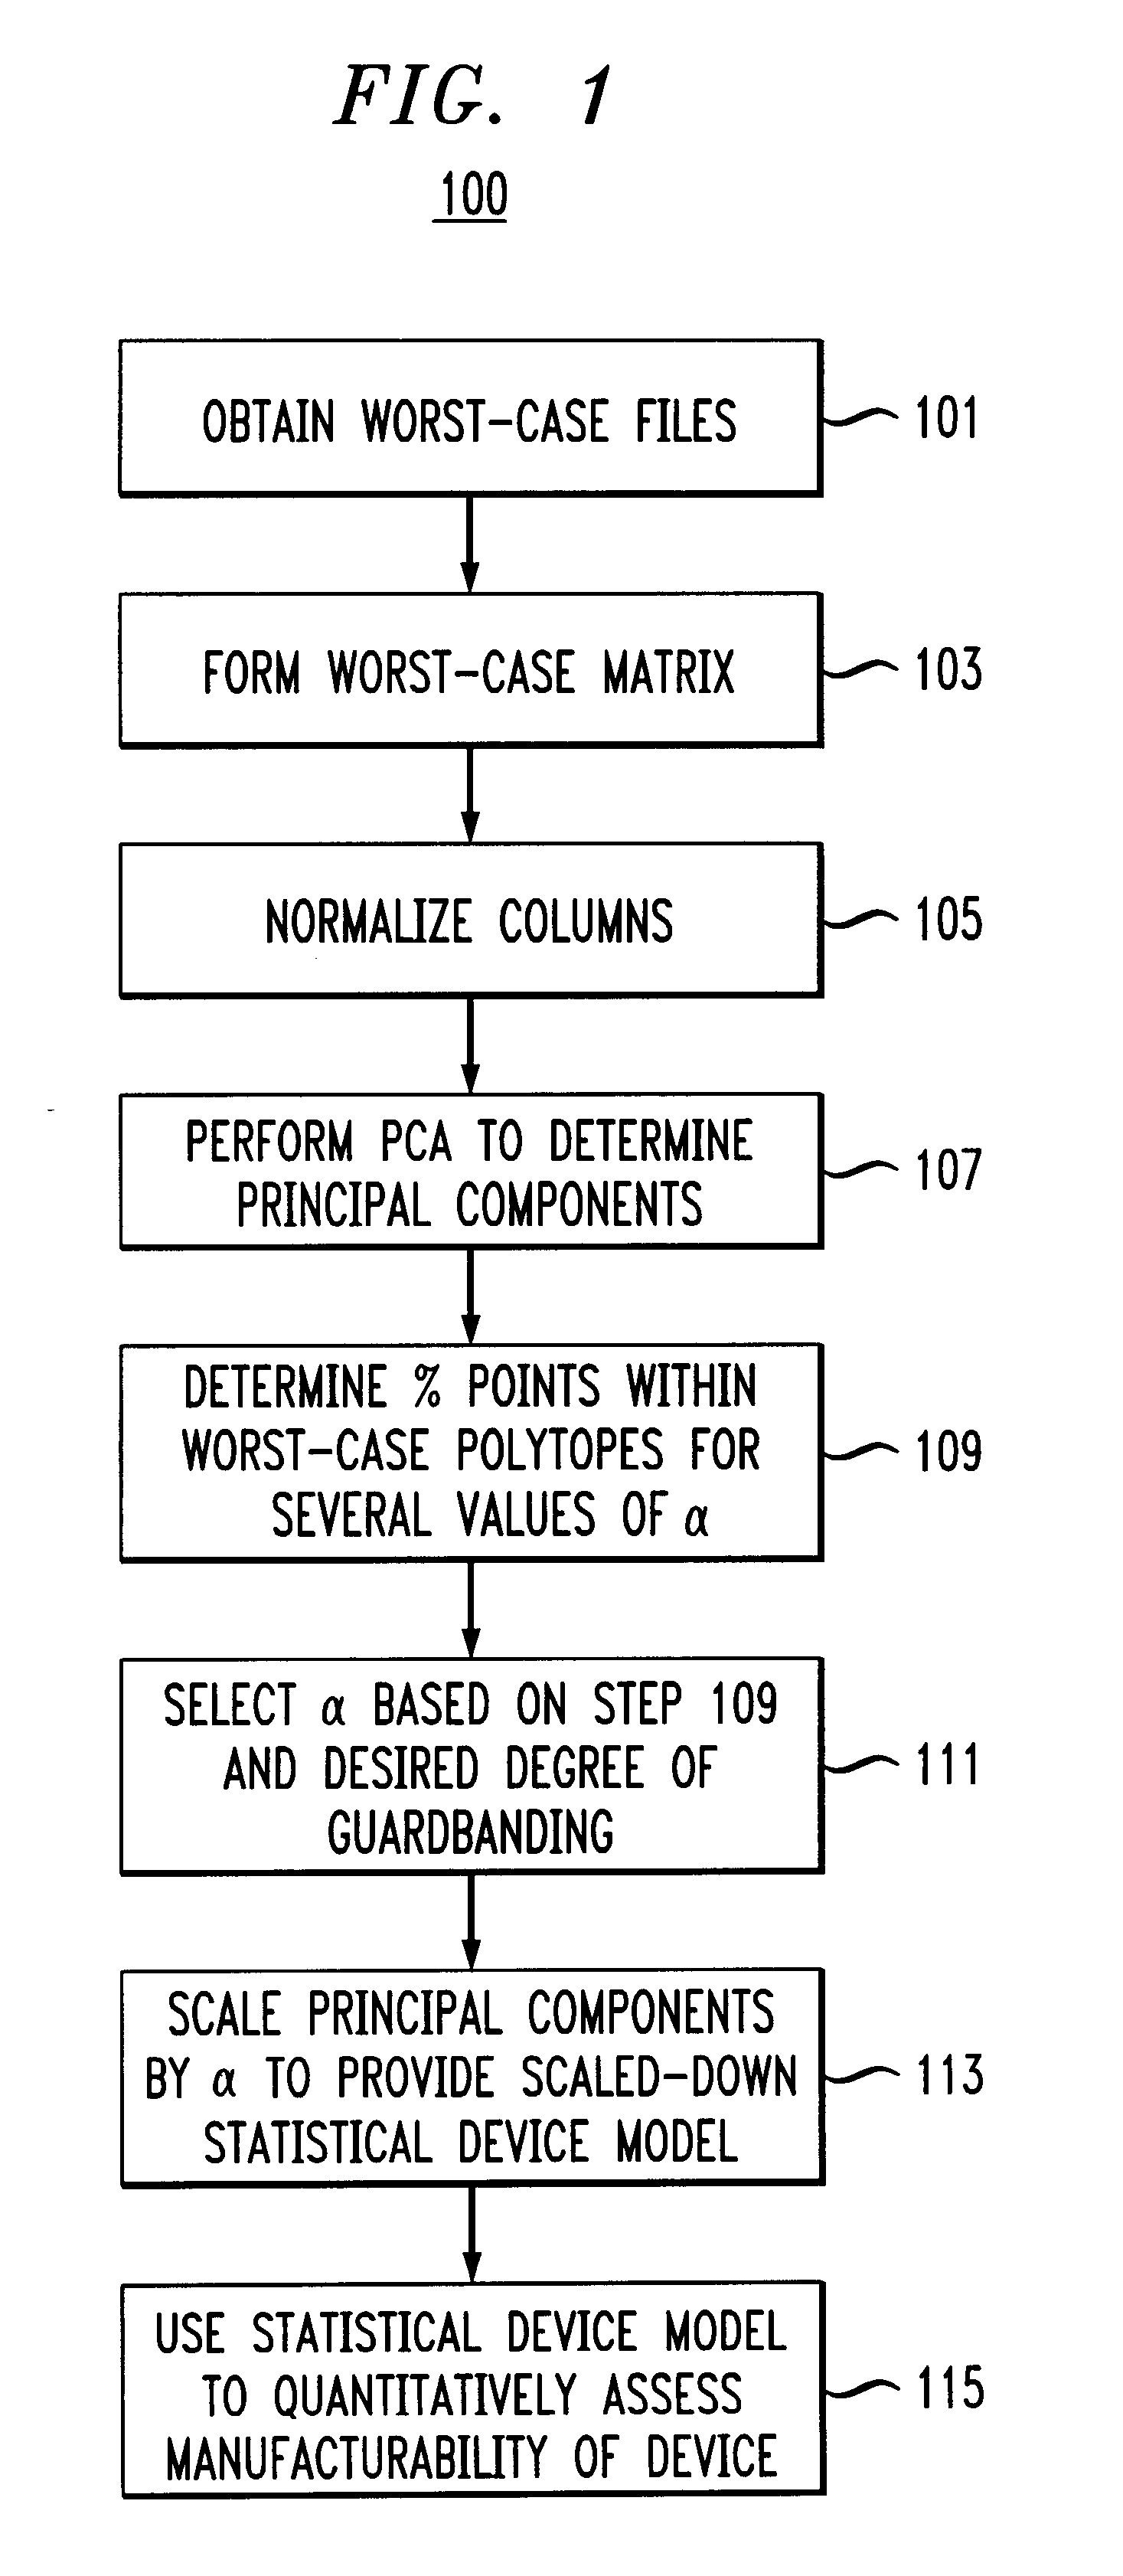 Deriving statistical device models from worst-case files